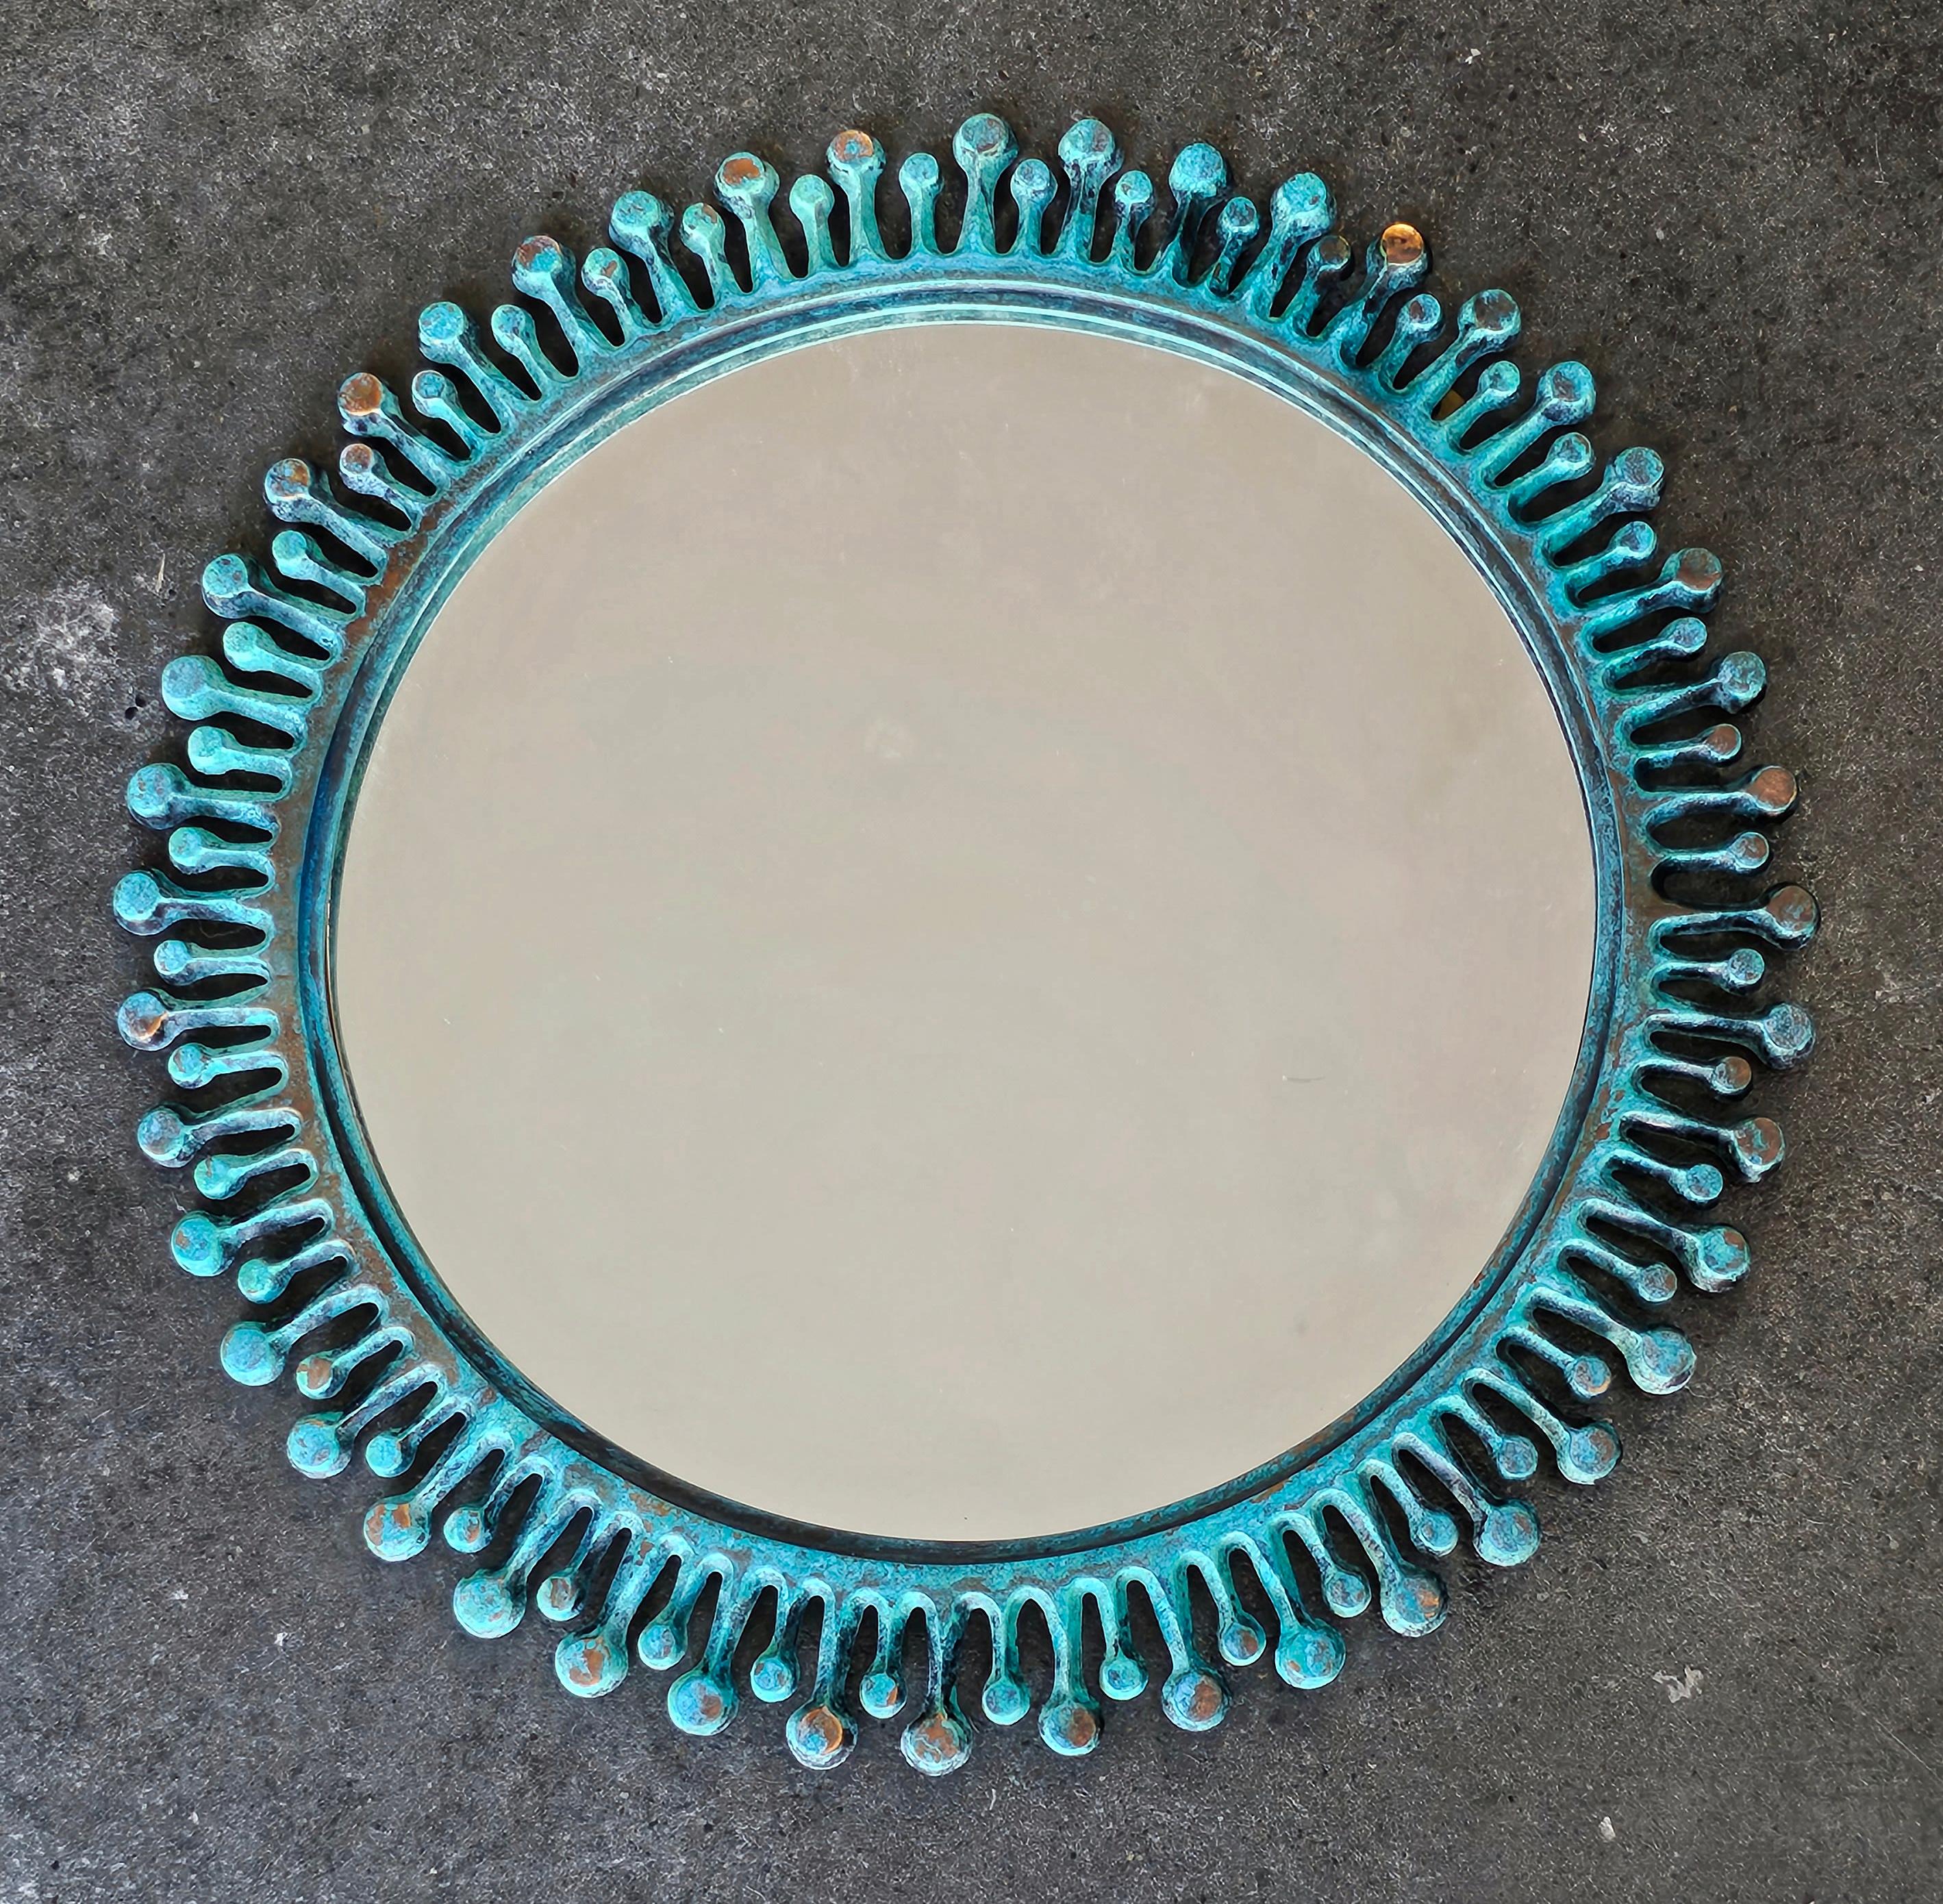 In this listing you will find a vintique (or antique) Sunburst Mirror. It os made of bronze a d features heavy green/blueish patina caused by oxidation. Due to unevenly spread patina it is hard to determine the age of the mirror. There is a